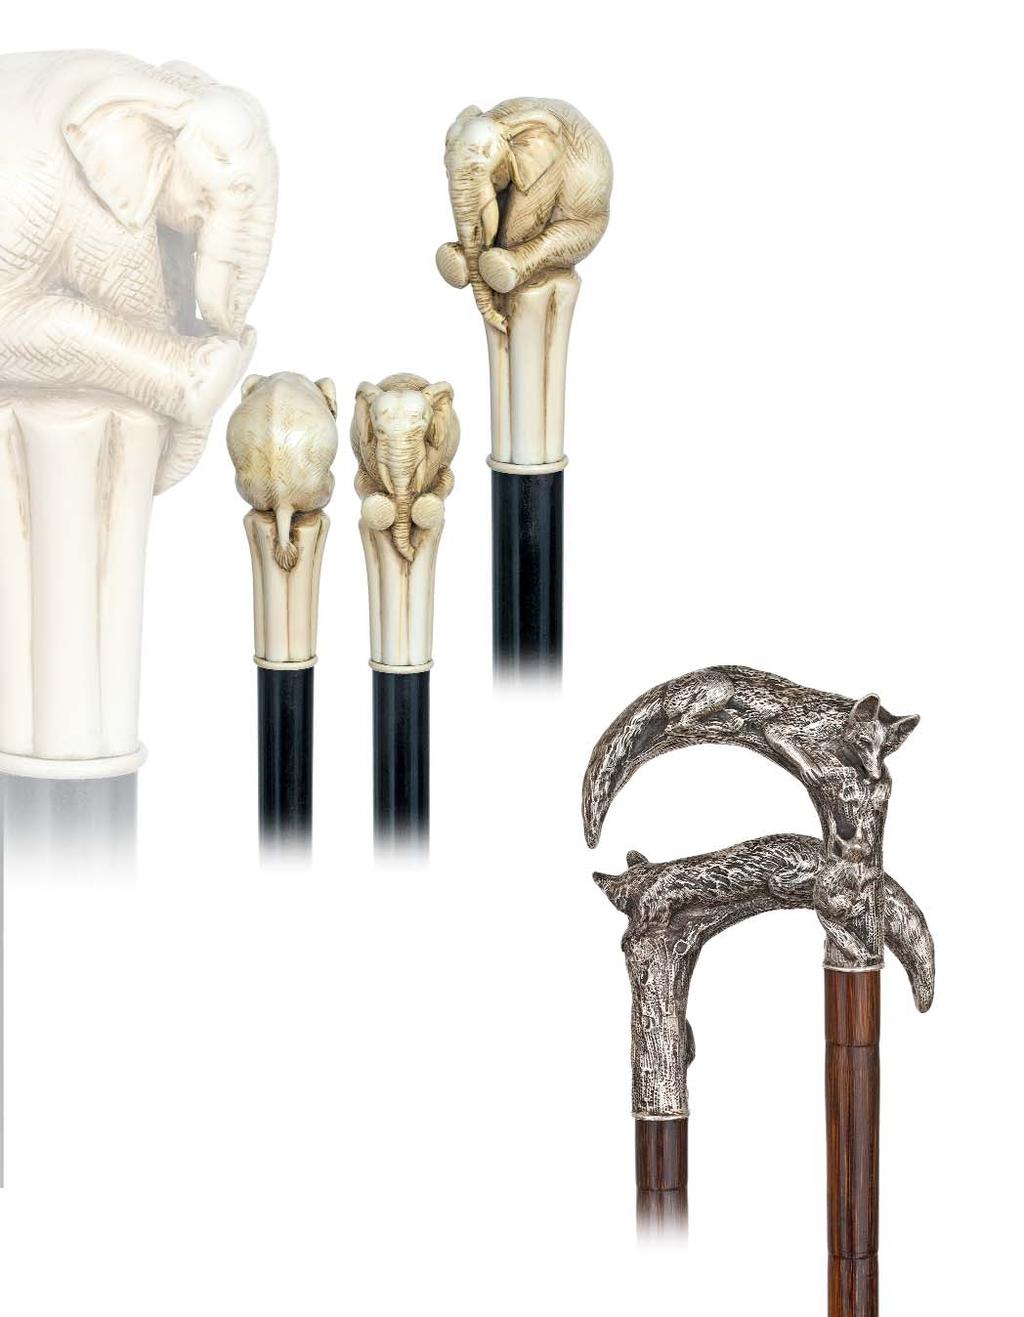 21 21. Great Ivory Elephant Cane English, 19th Century-An ivory circus elephant seated with a long trunk hanging between the front paws. Unusual fine detail to the face with tiny eyes, skin and tail.